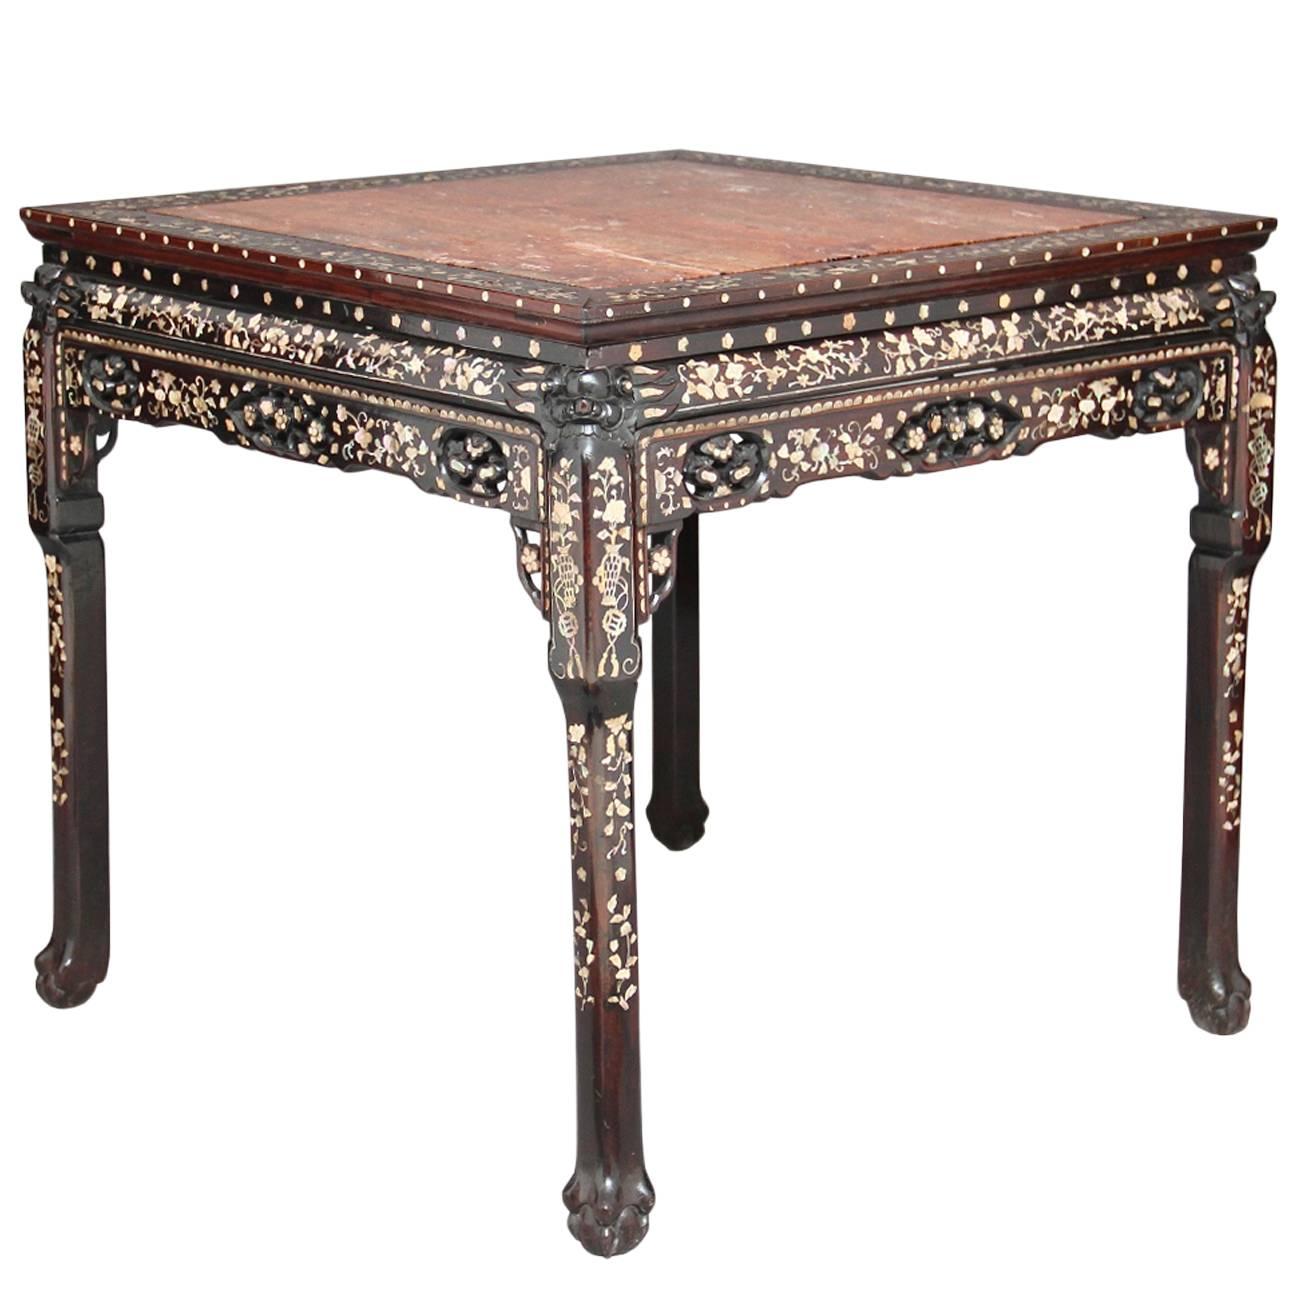 19th Century Carved Chinese Rosewood and Mother-of-Pearl Centre Table